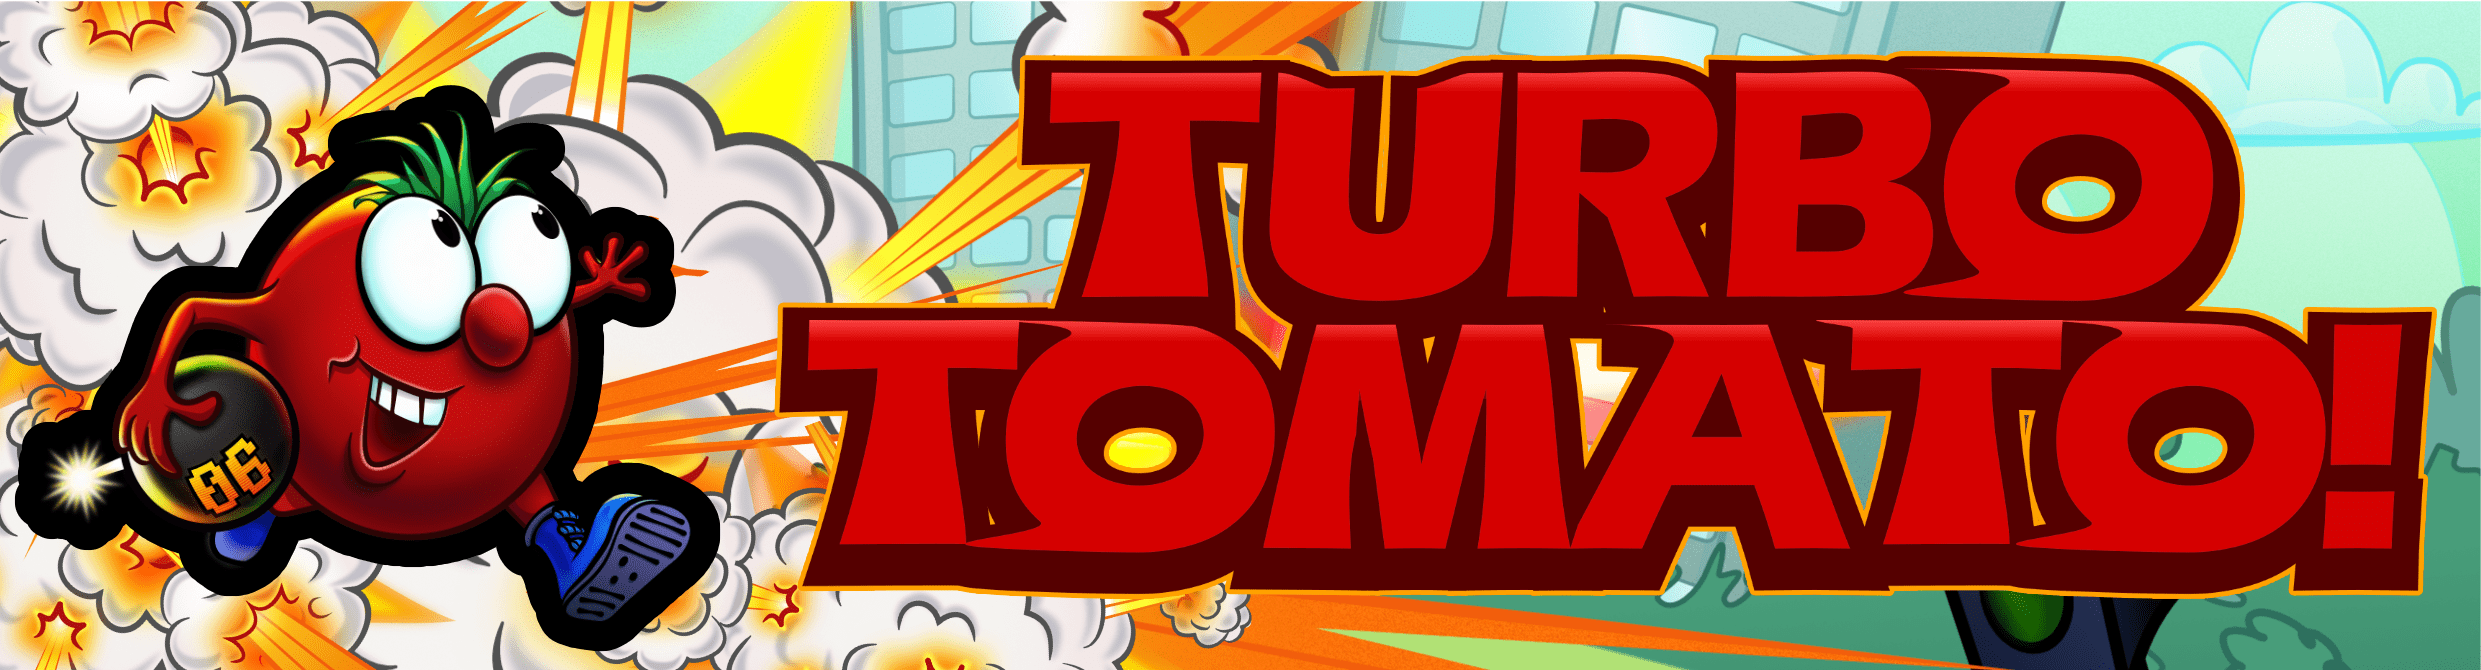 TURBO TOMATO is a Fun Top-Down Action Amiga by Nivrig Games